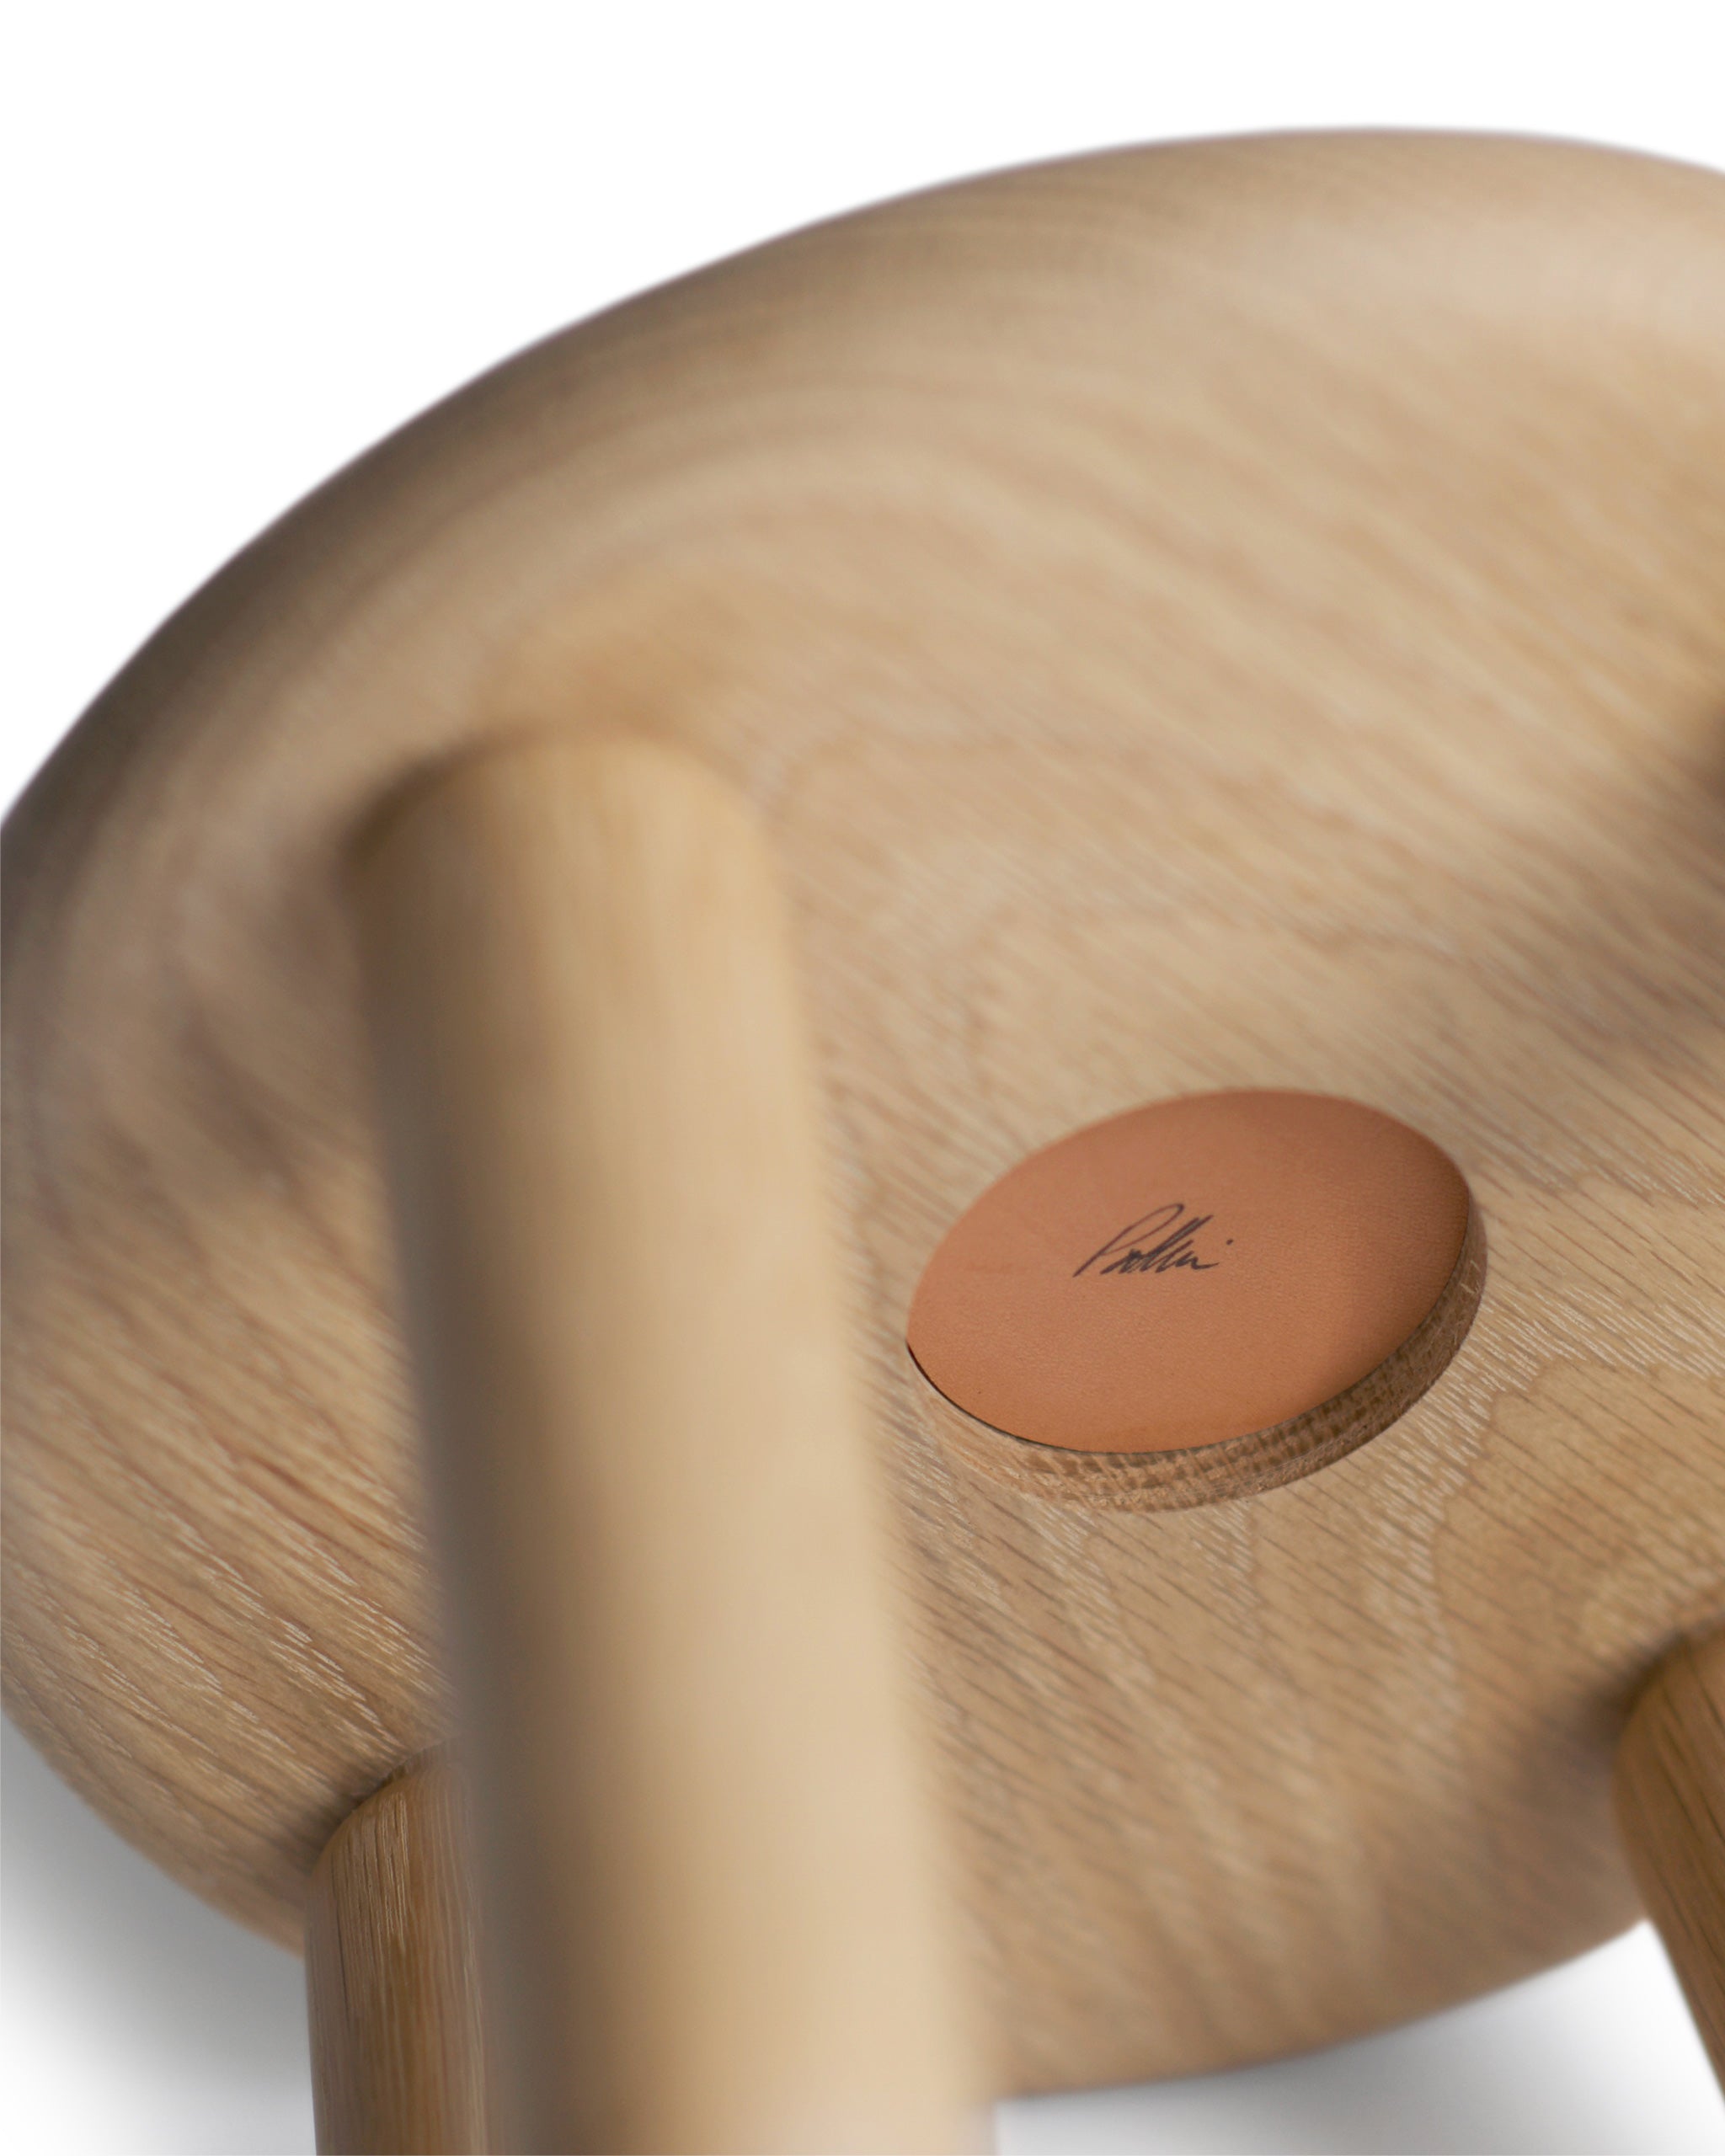 Detailed image showing the bottom of the bialy children's chair. Designer Pat Kim's signature signed on the bottom of the chair.